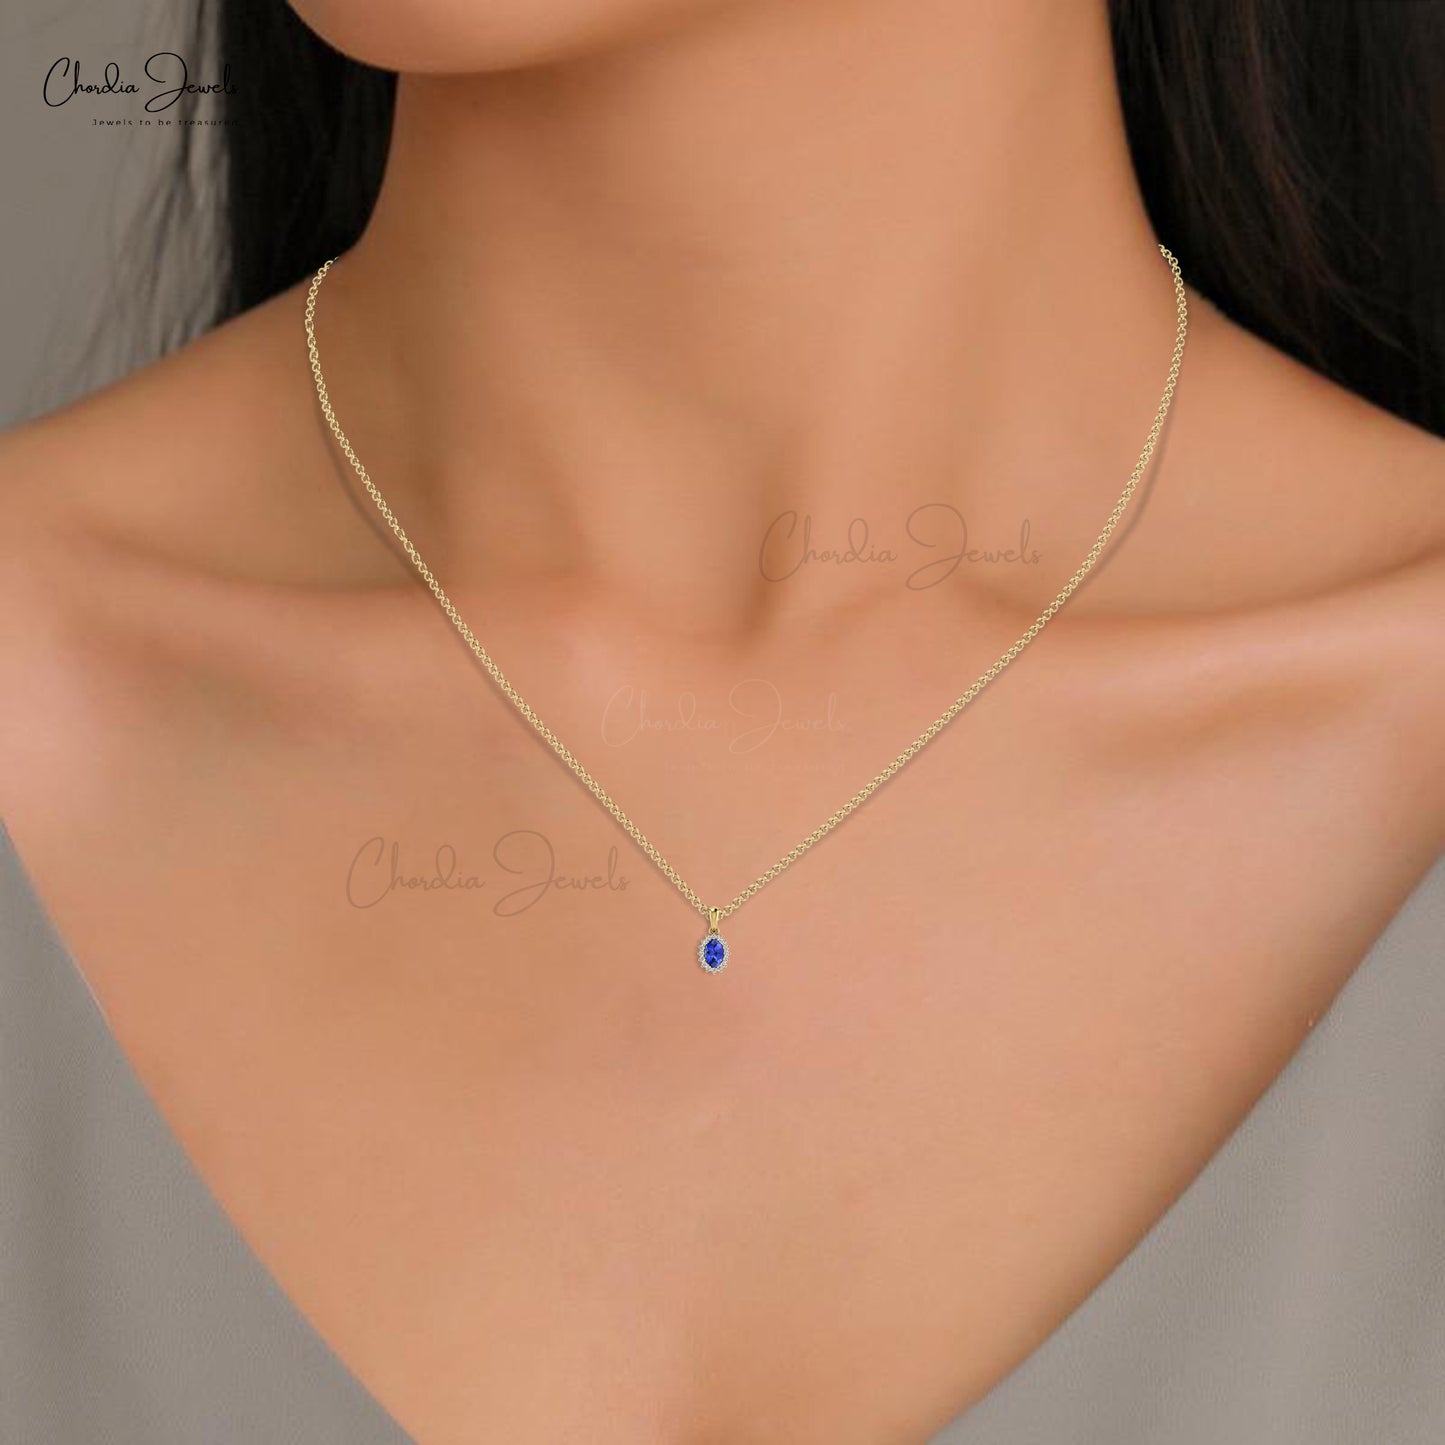 Luxury Women Simple Round Natural White Diamond Pendant Necklace December Birthstone Blue Tanzanite Pendant in 14k Pure Gold Gift For Wife